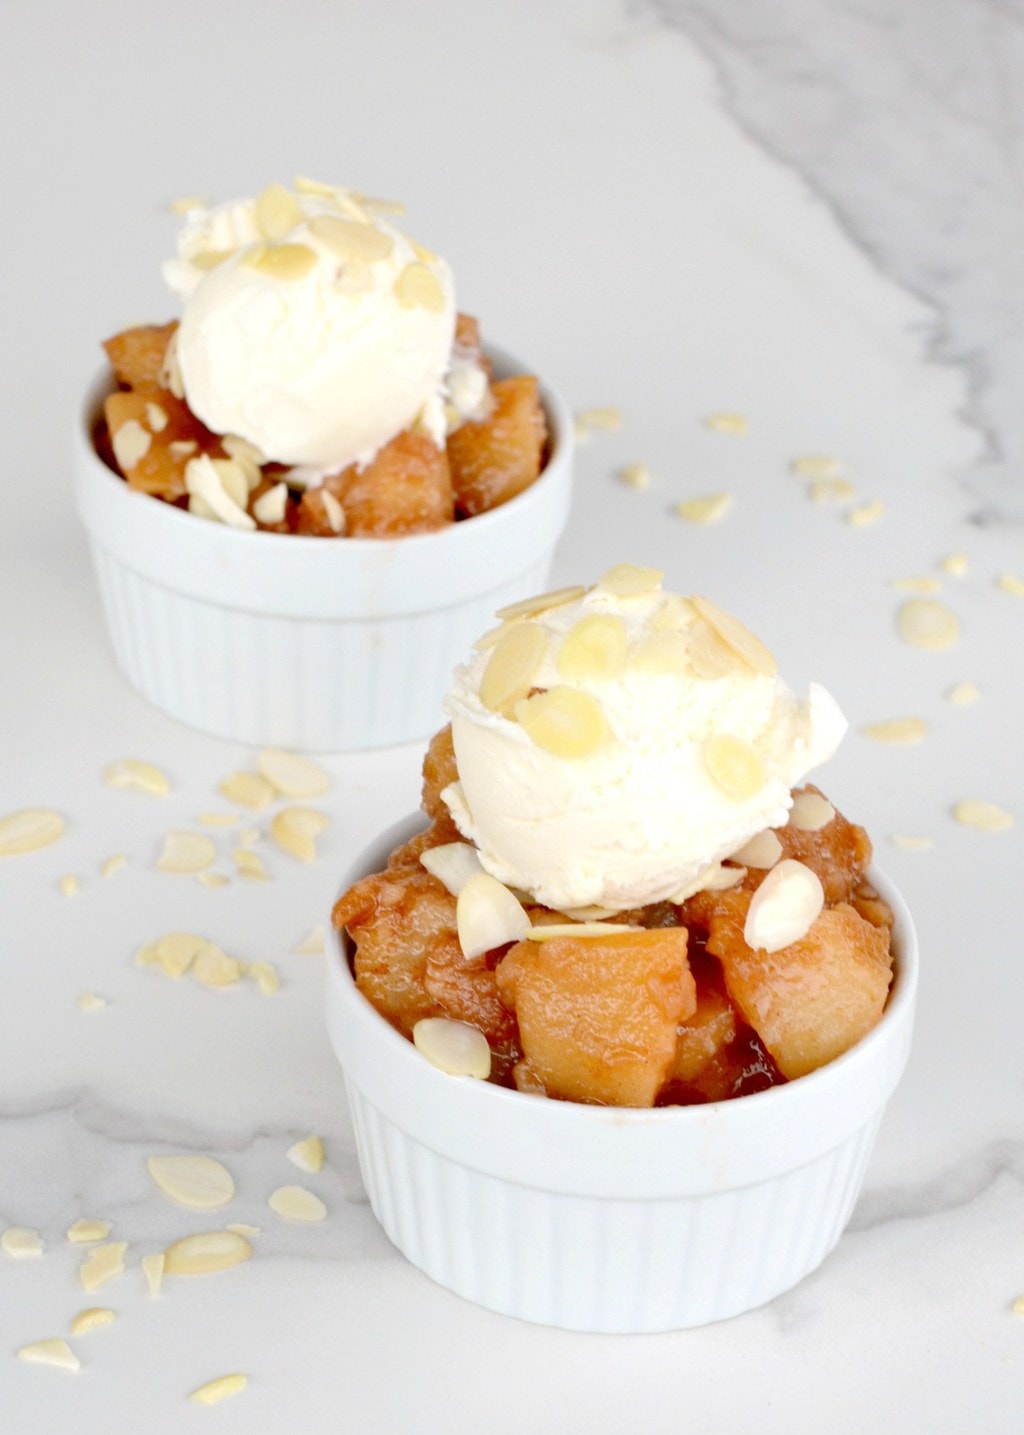 Apple pie filling is an easy instant pot apple dessert recipe shown topped with vanilla ice cream.